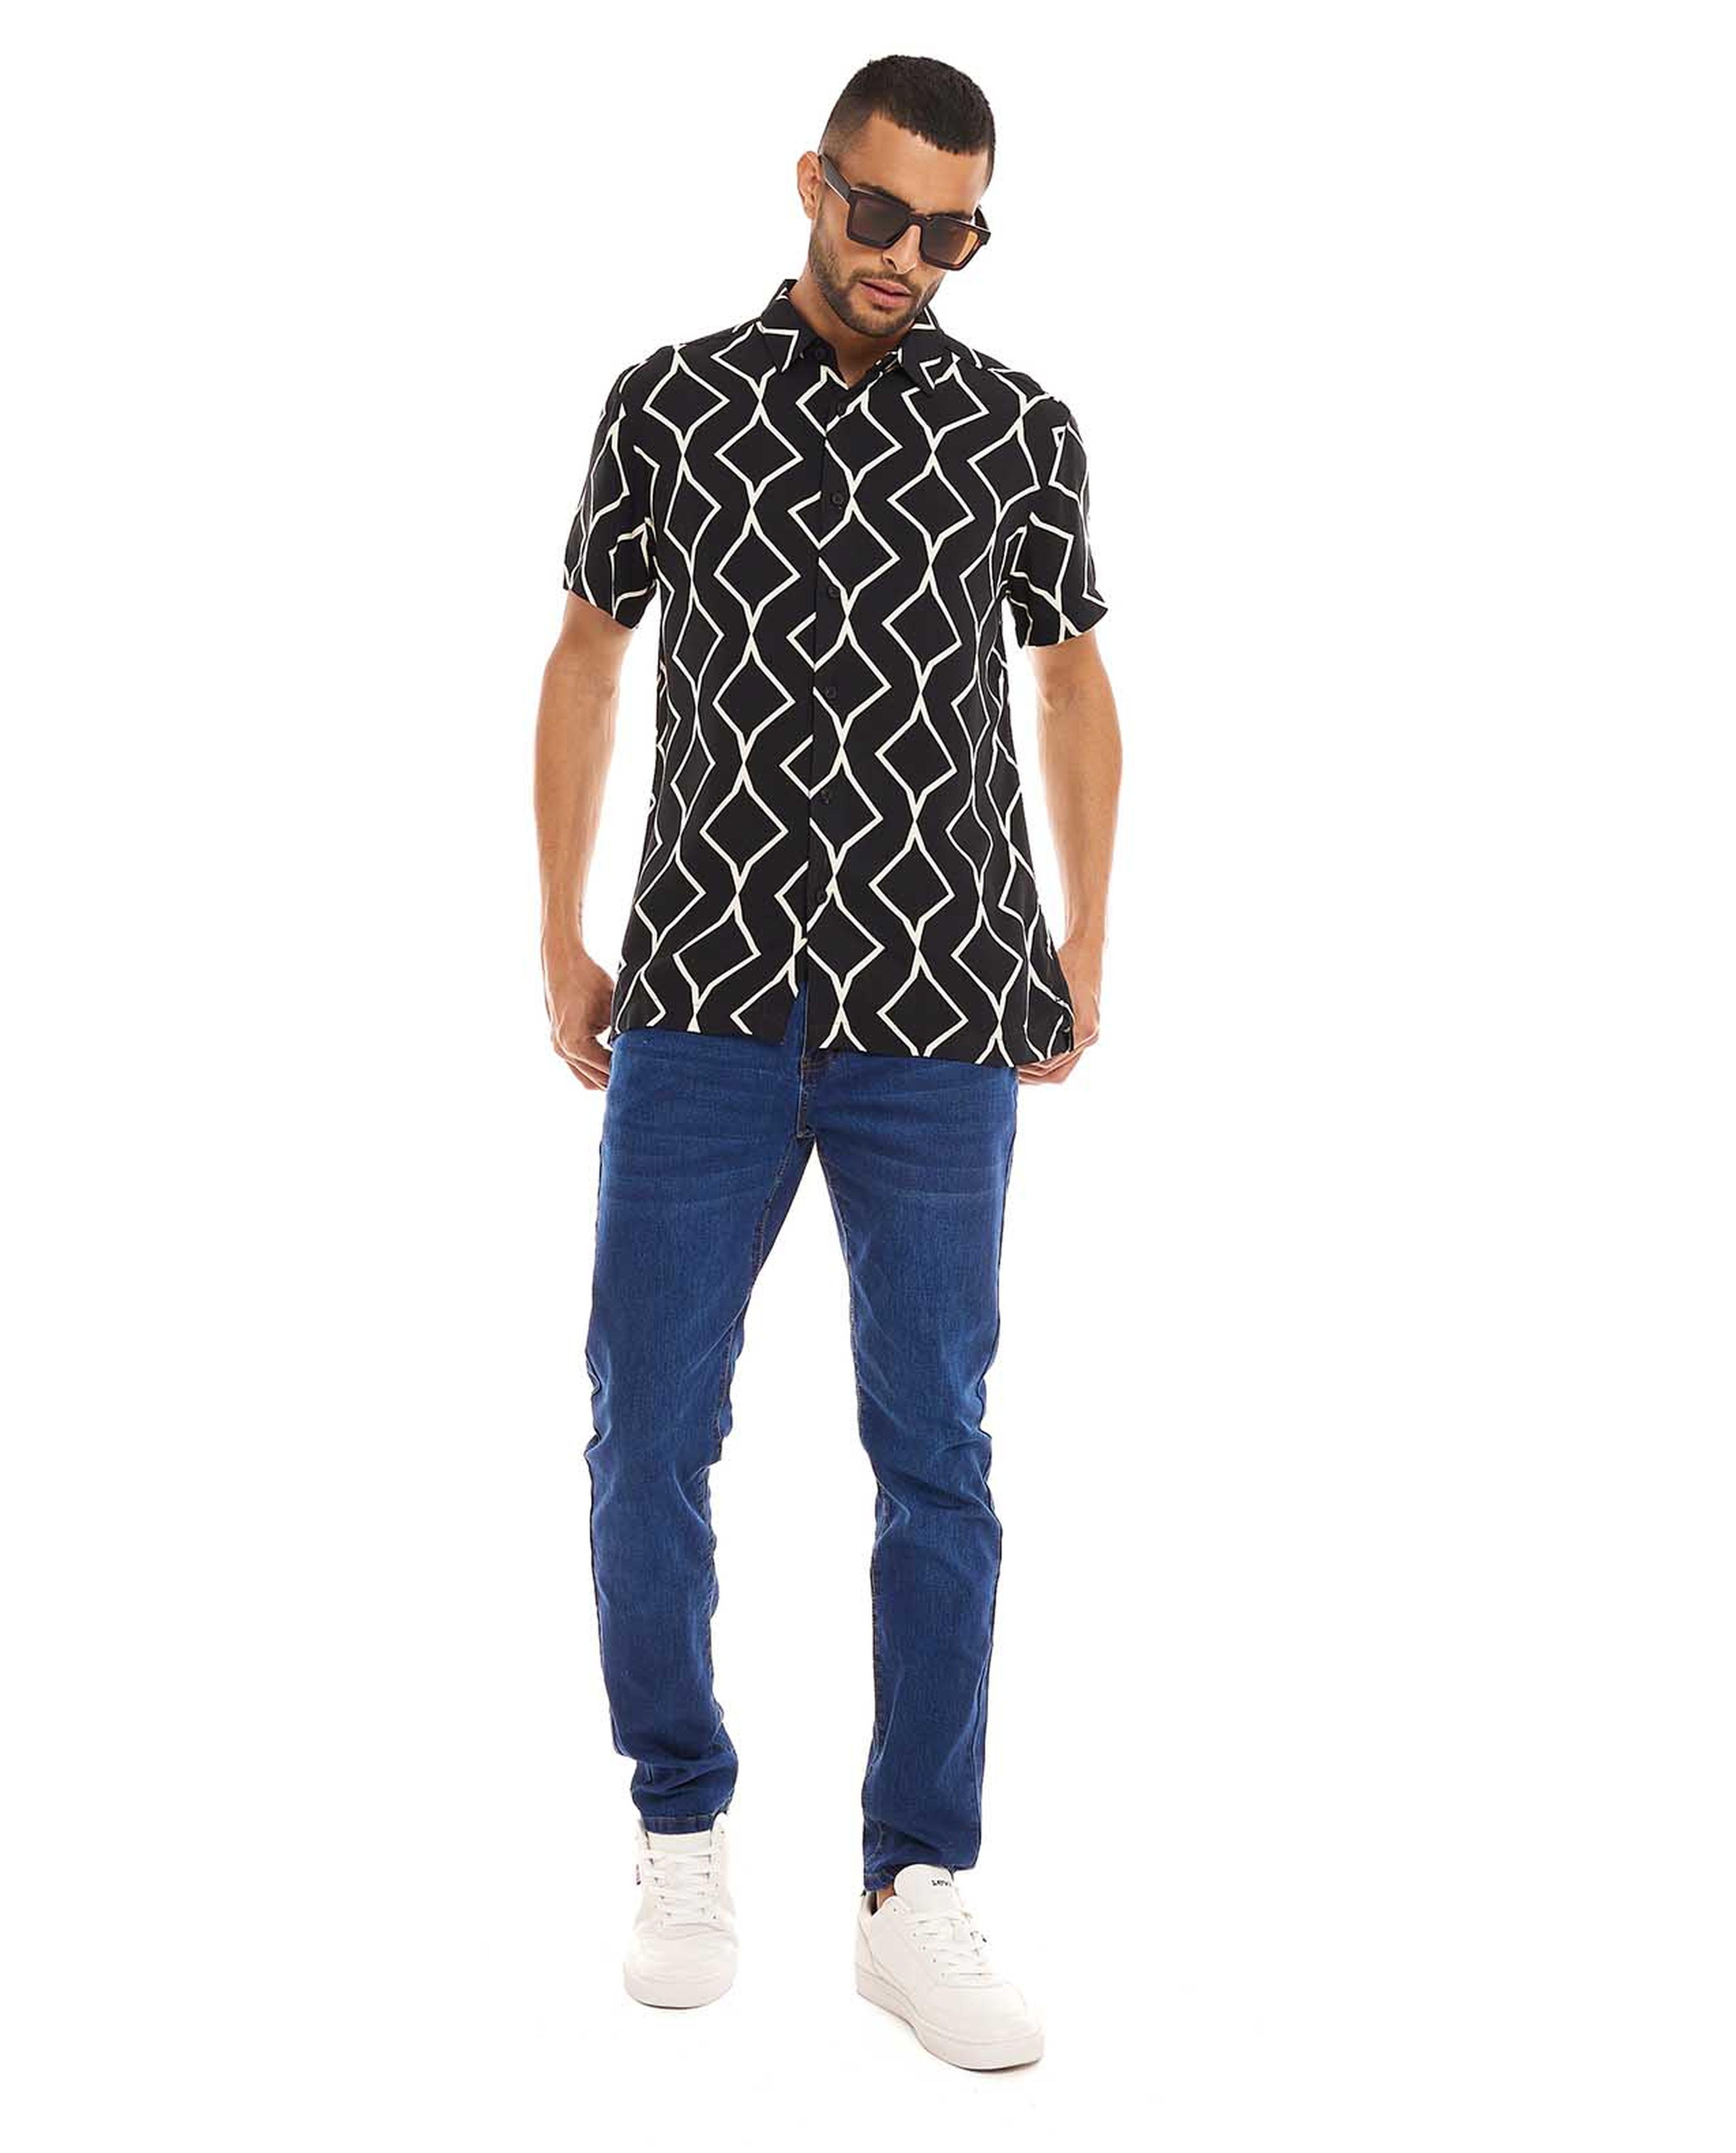 Patterned Shirt with Spread Collar and Short Sleeves